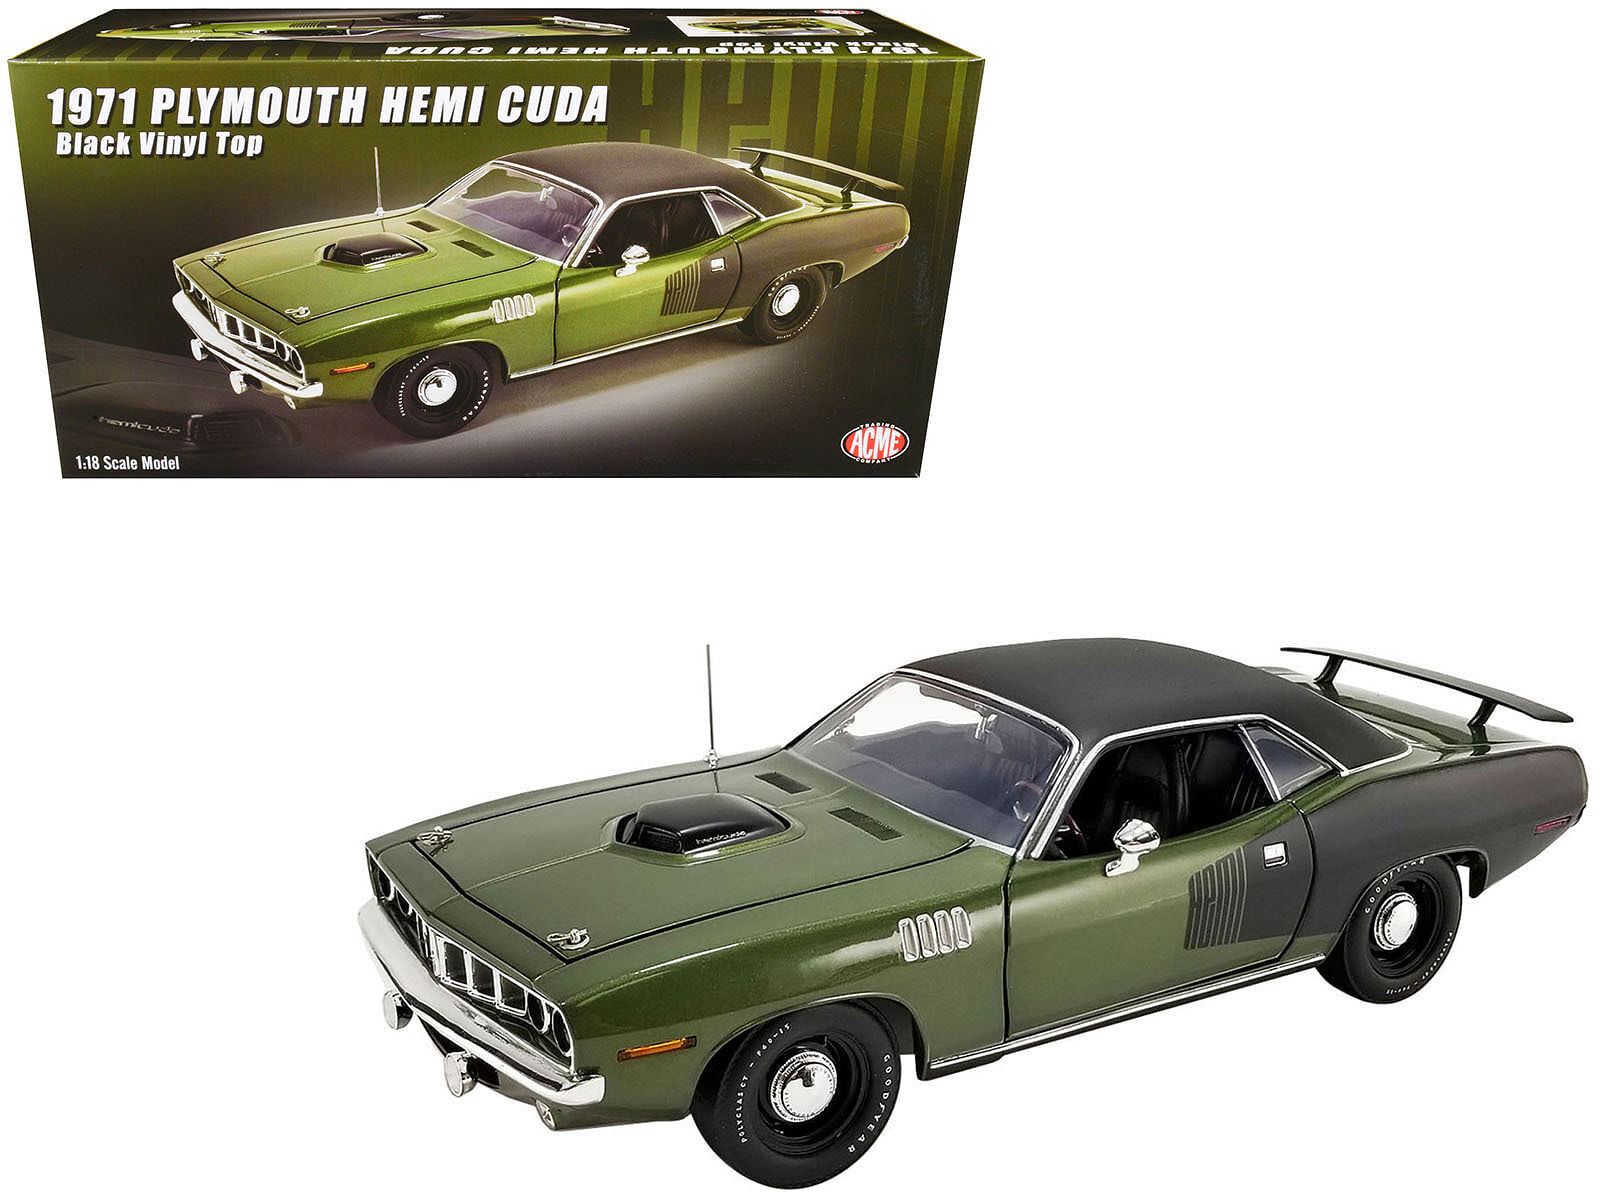 1971 Plymouth Hemi Barracuda Ivy Green with Black Graphics and Black Vinyl Top 